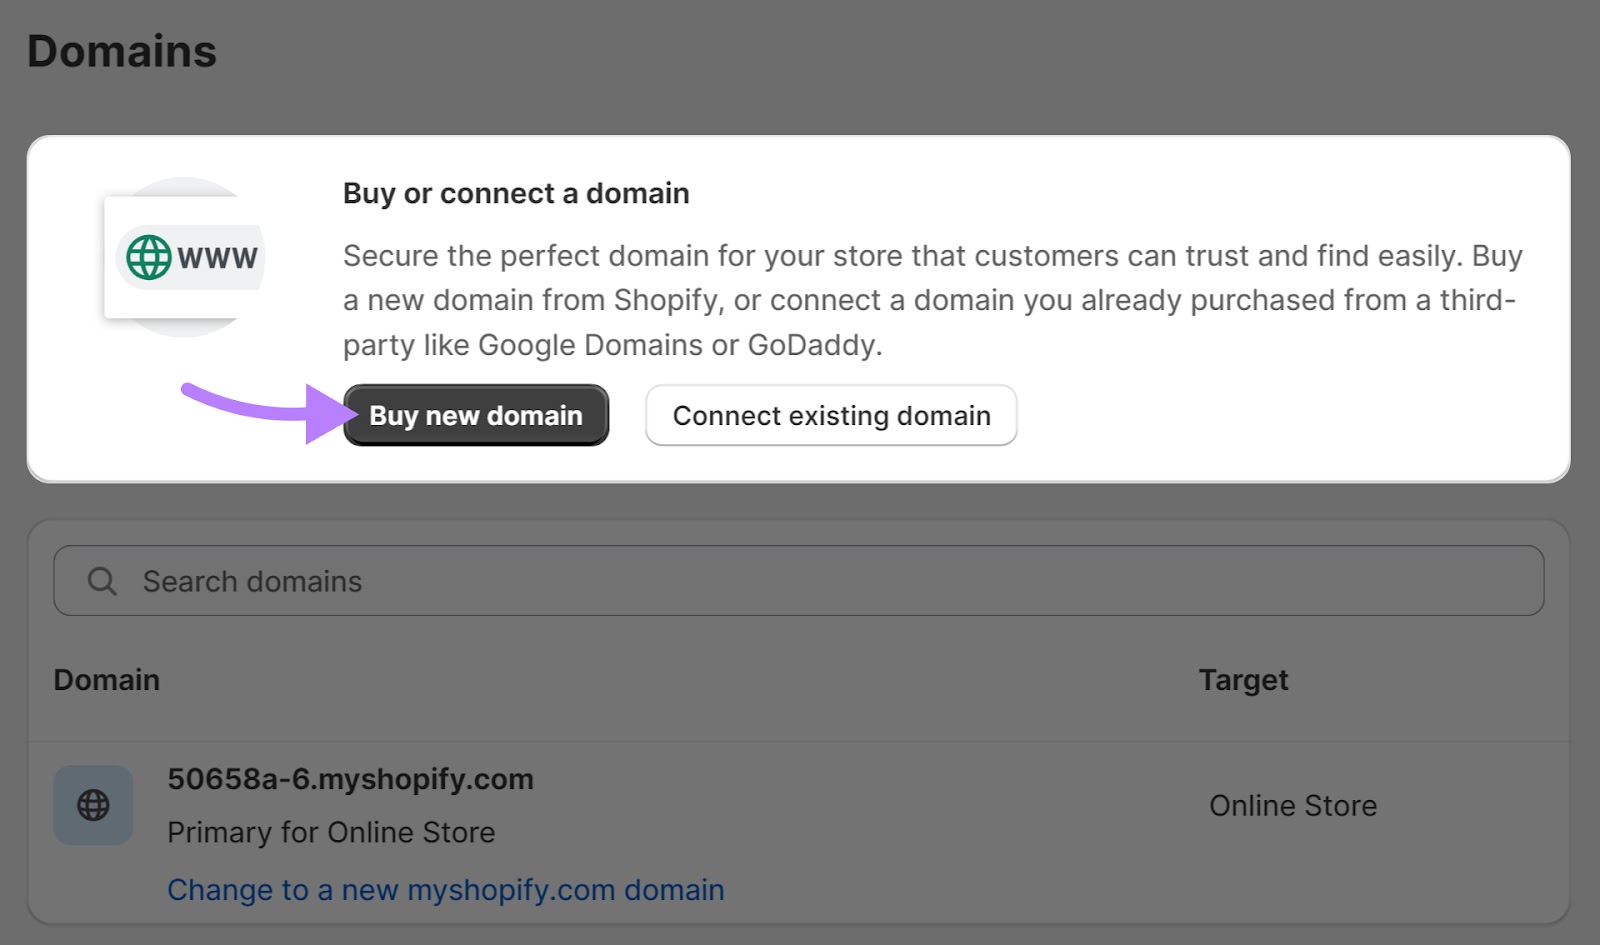 “Buy new domain” button under "Domains" section in Shopify admin